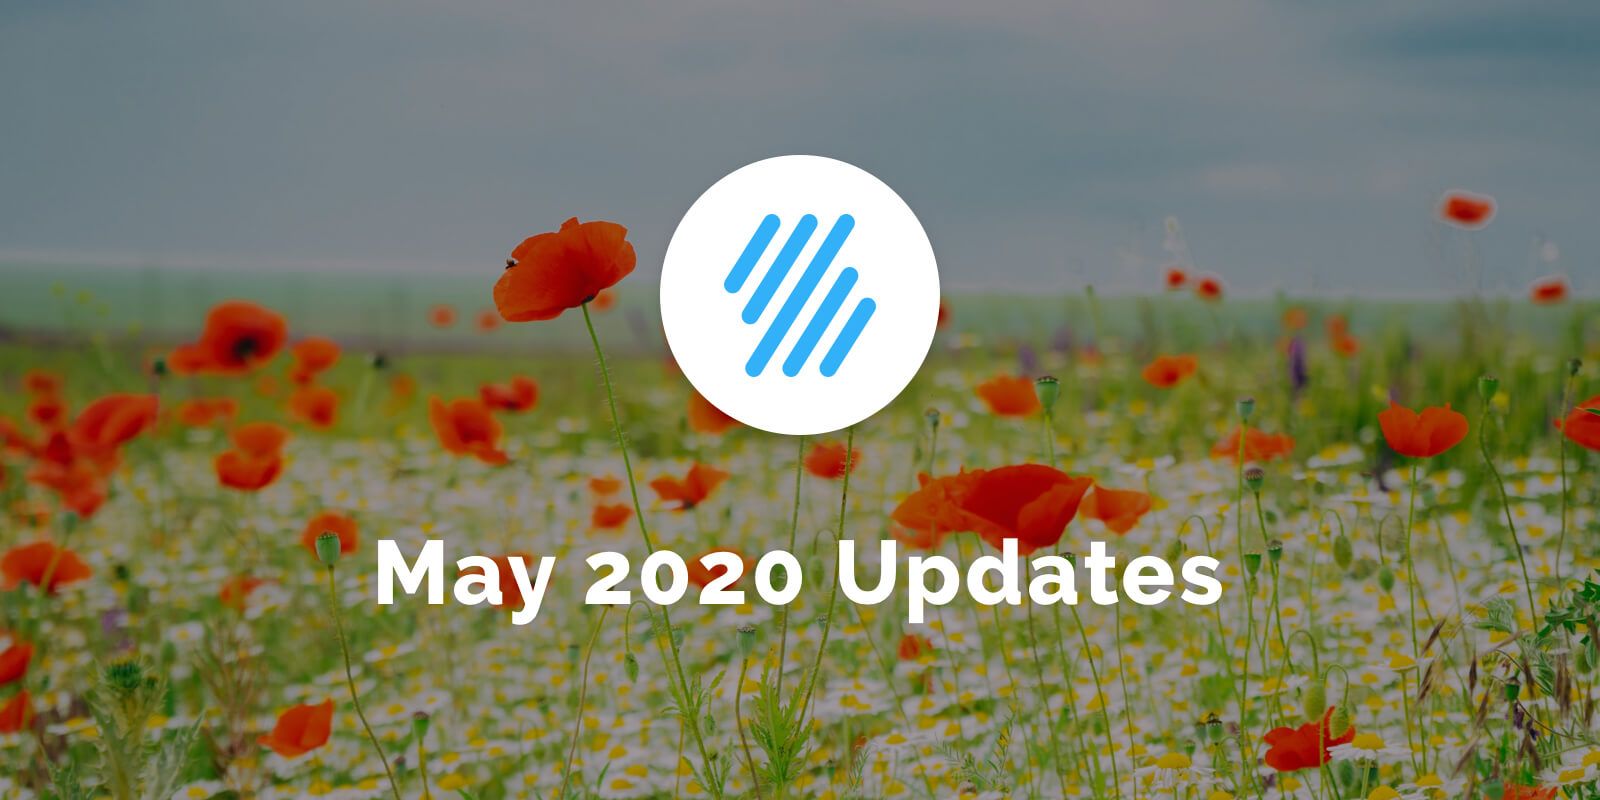 May 2020 Update